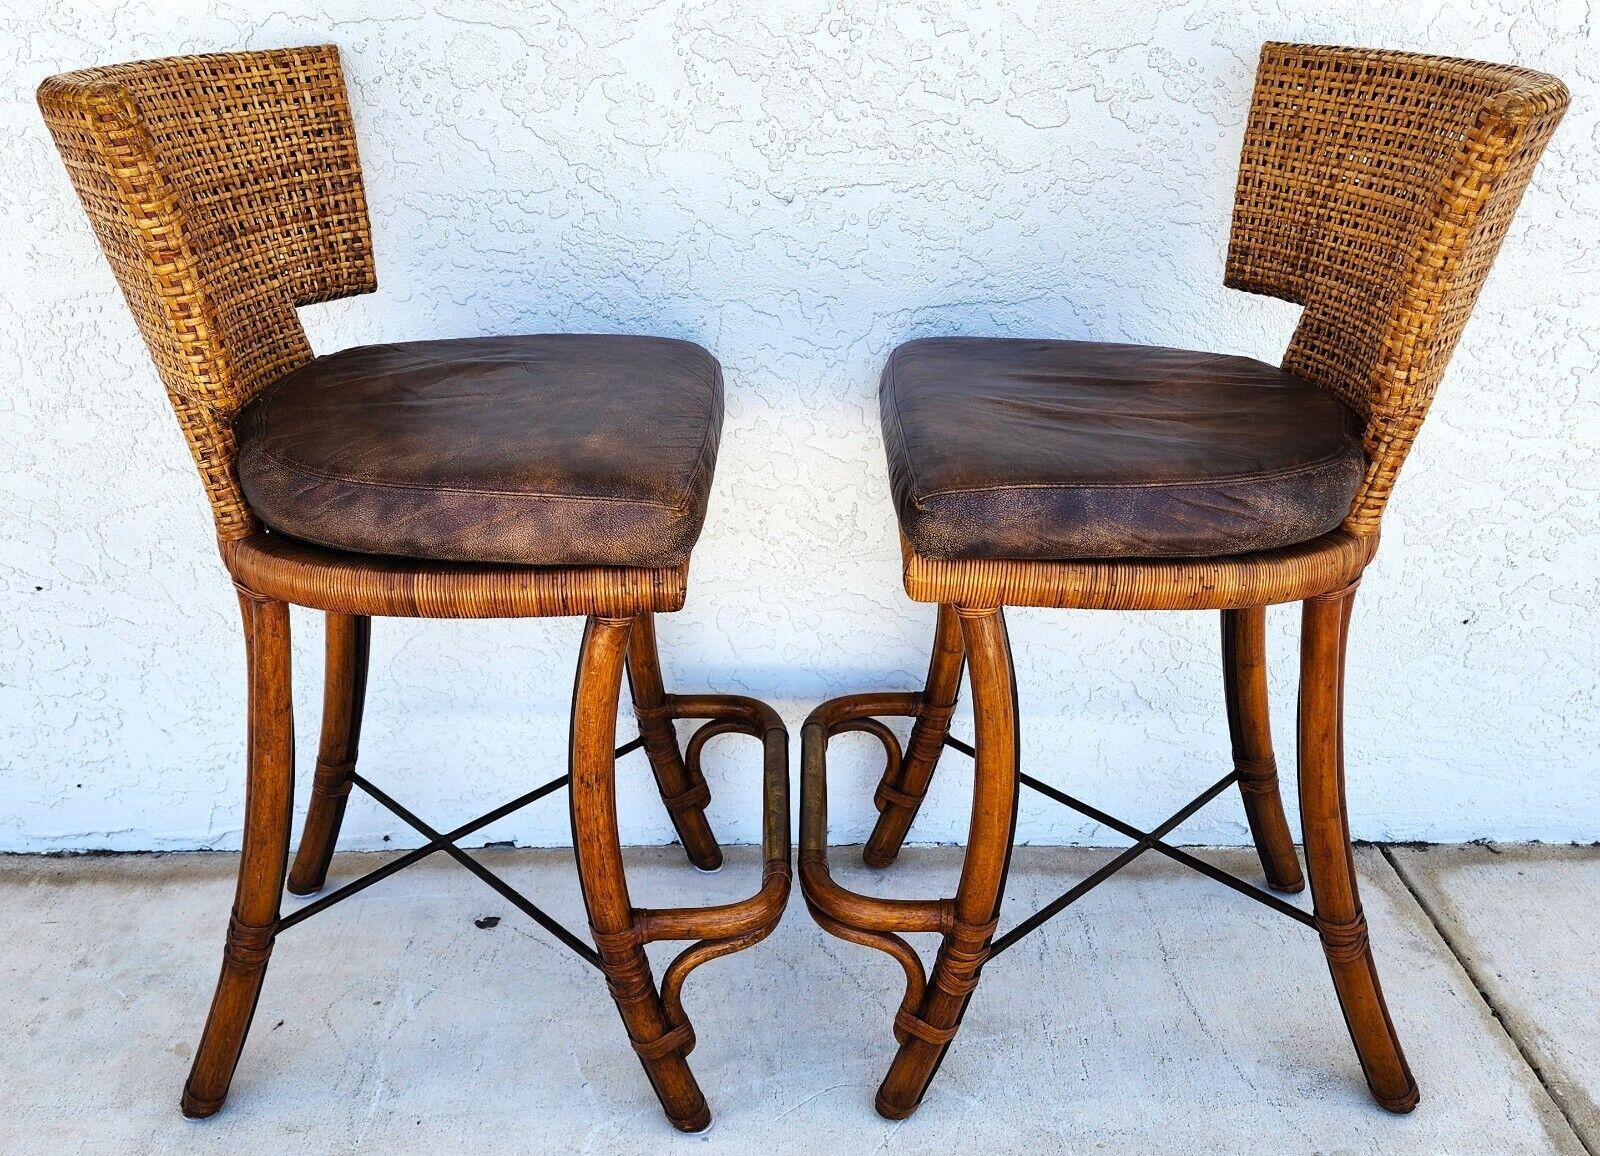 For FULL item description click on CONTINUE READING at the bottom of this page.

Offering One Of Our Recent Palm Beach Estate Fine Furniture Acquisitions Of A 
Pair of Vintage Kreiss (attributed) Bamboo Barstools with Double Caned Backs, Top Grain